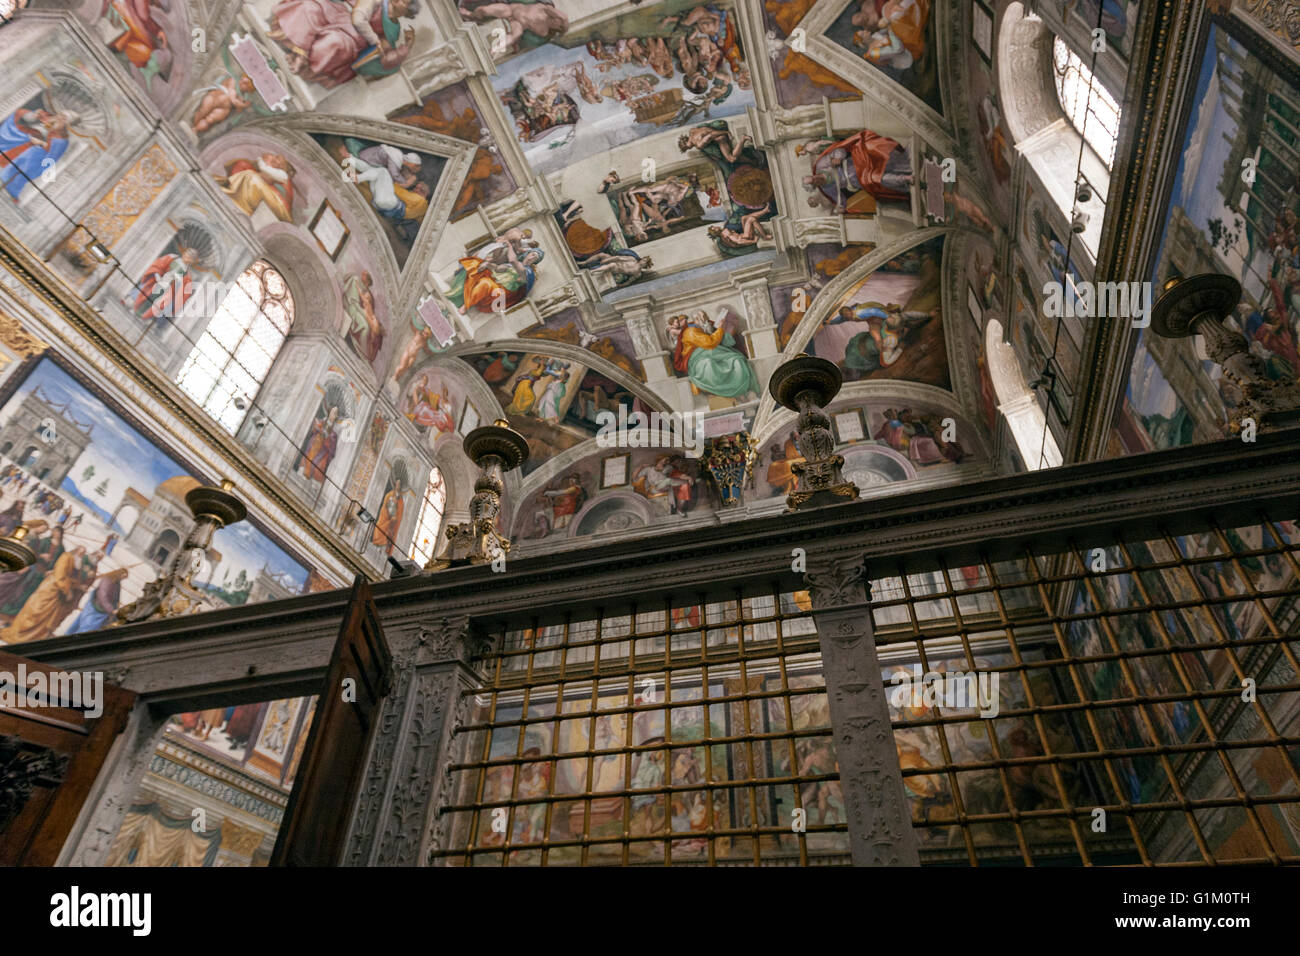 The Sistine Chapel Ceiling Painted By Michelangelo Stock Photo